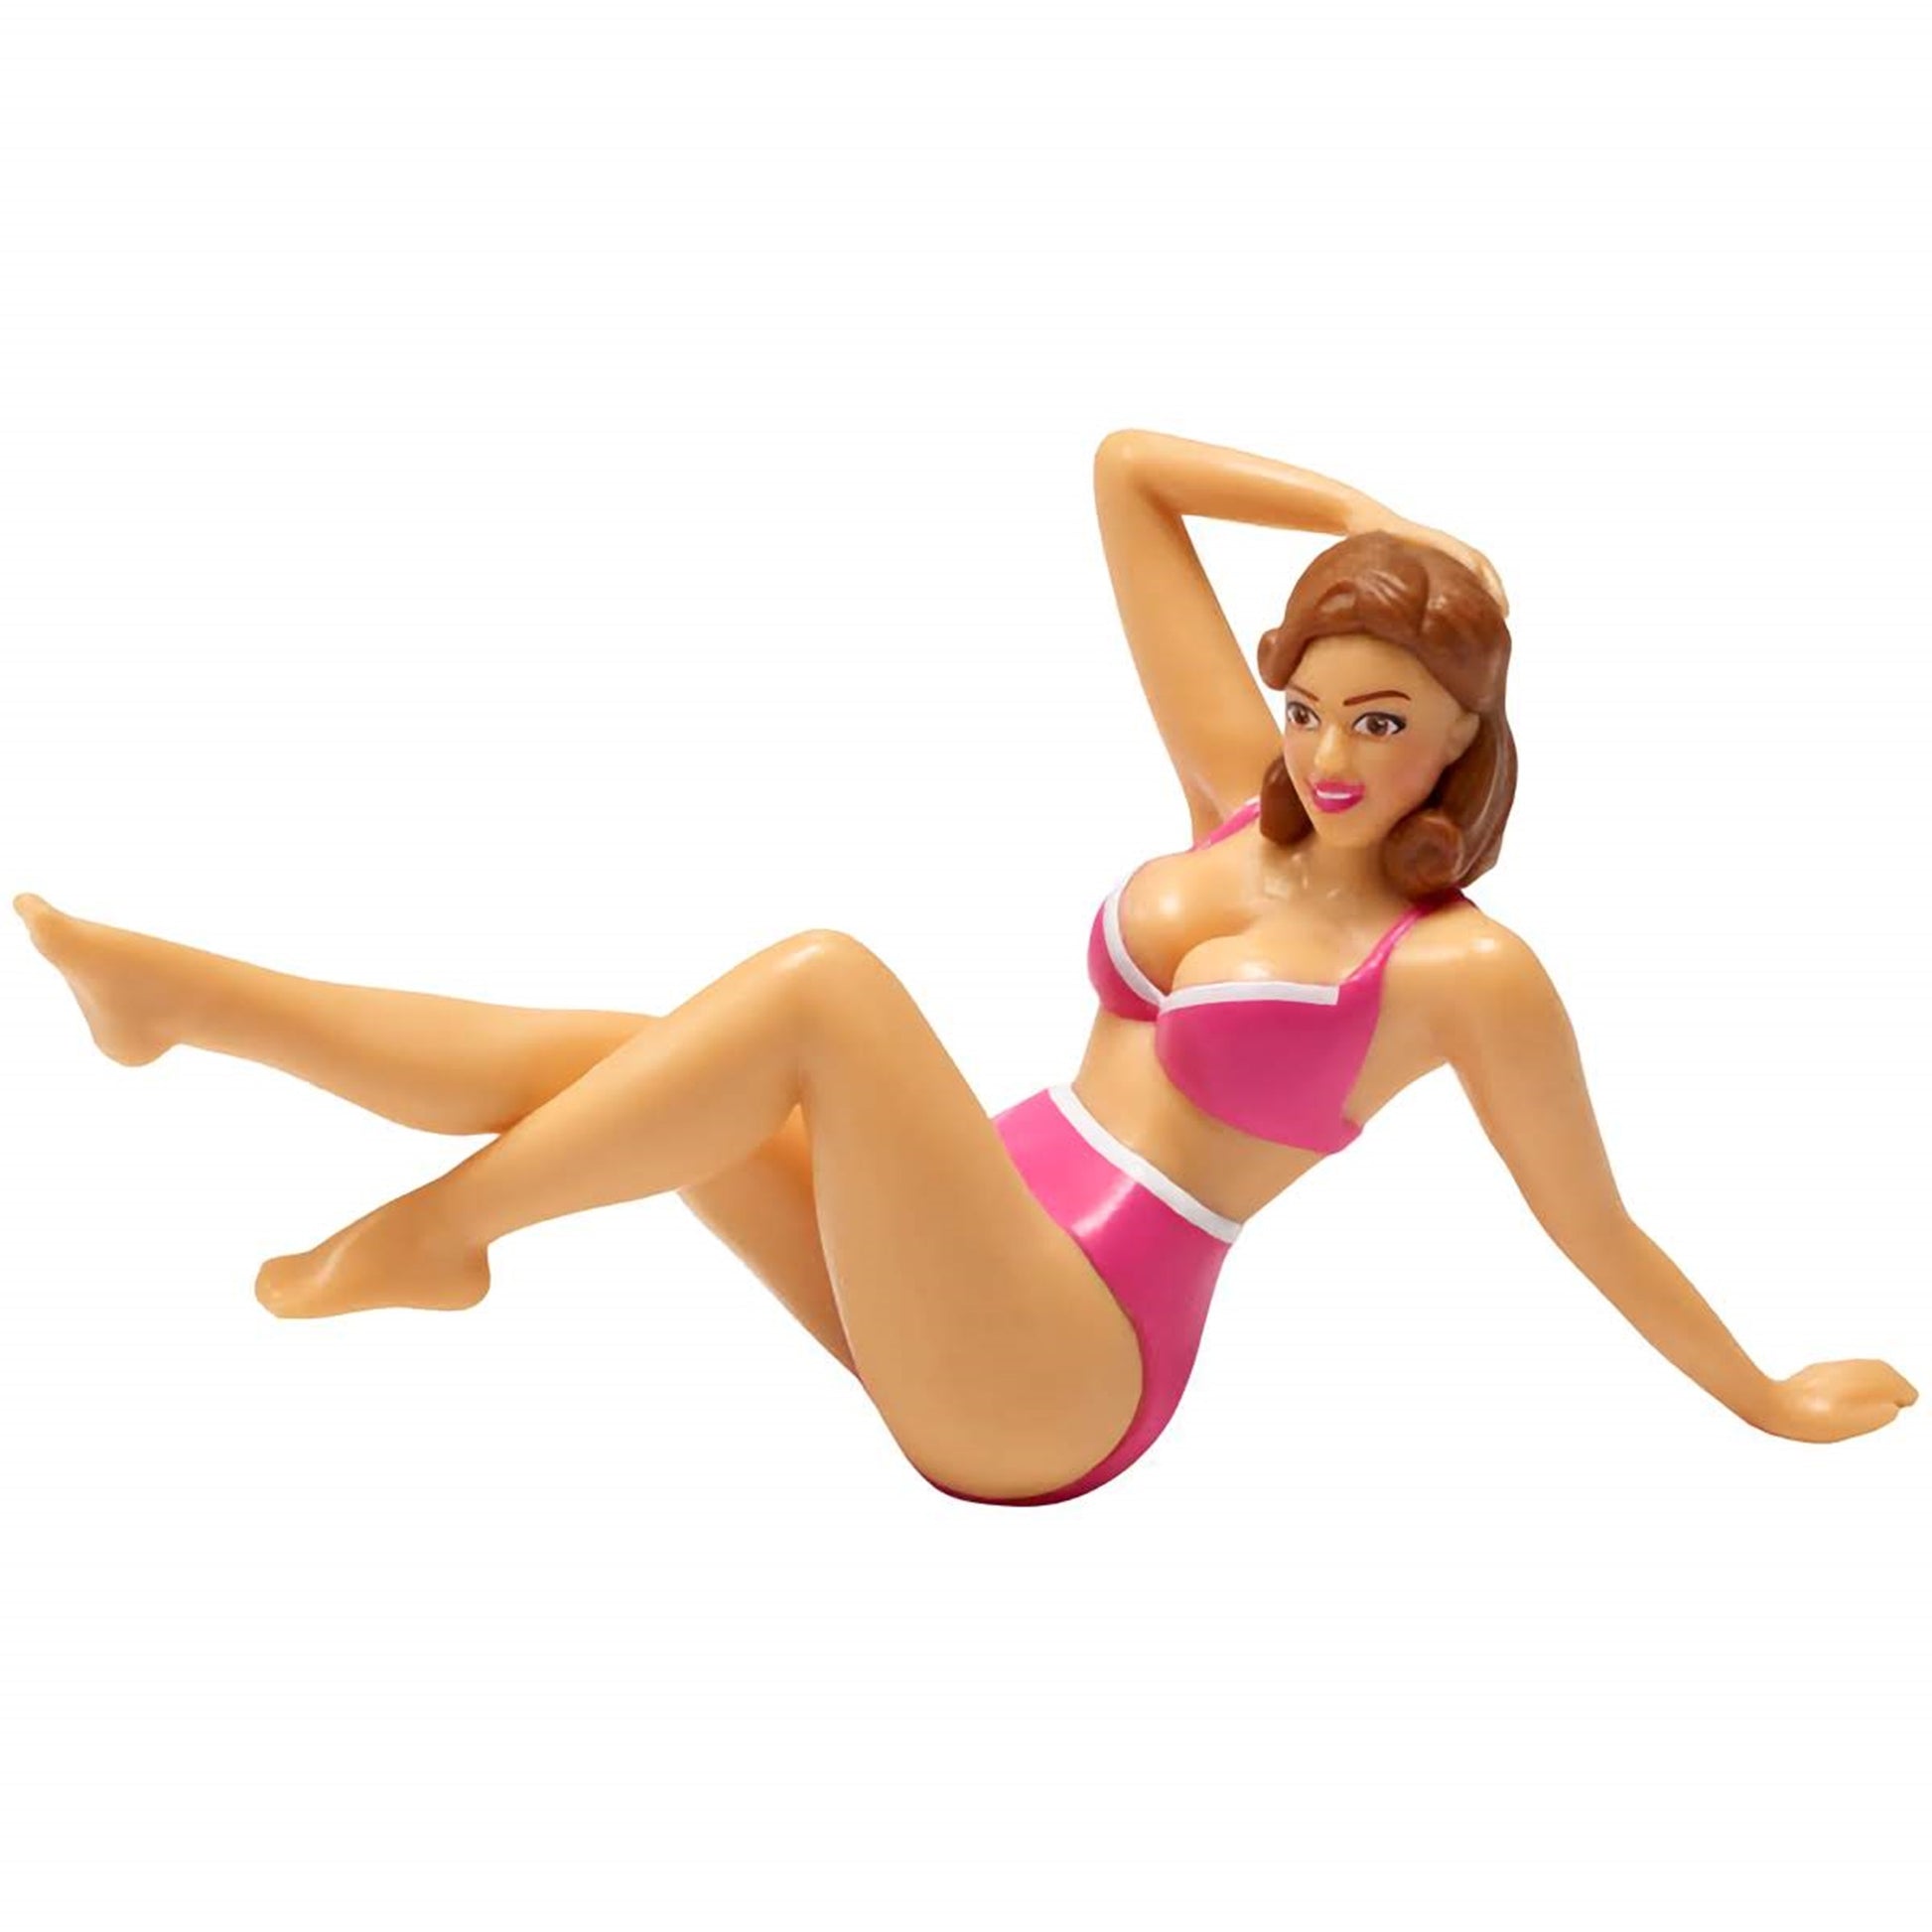 A plastic cake topper depicting a woman in a pink bikini, posed lying down with one hand behind her head. This topper adds a playful and cheeky touch to adult-themed party cakes and can be found at Lynn's Cake, Candy, and Chocolate Supplies.